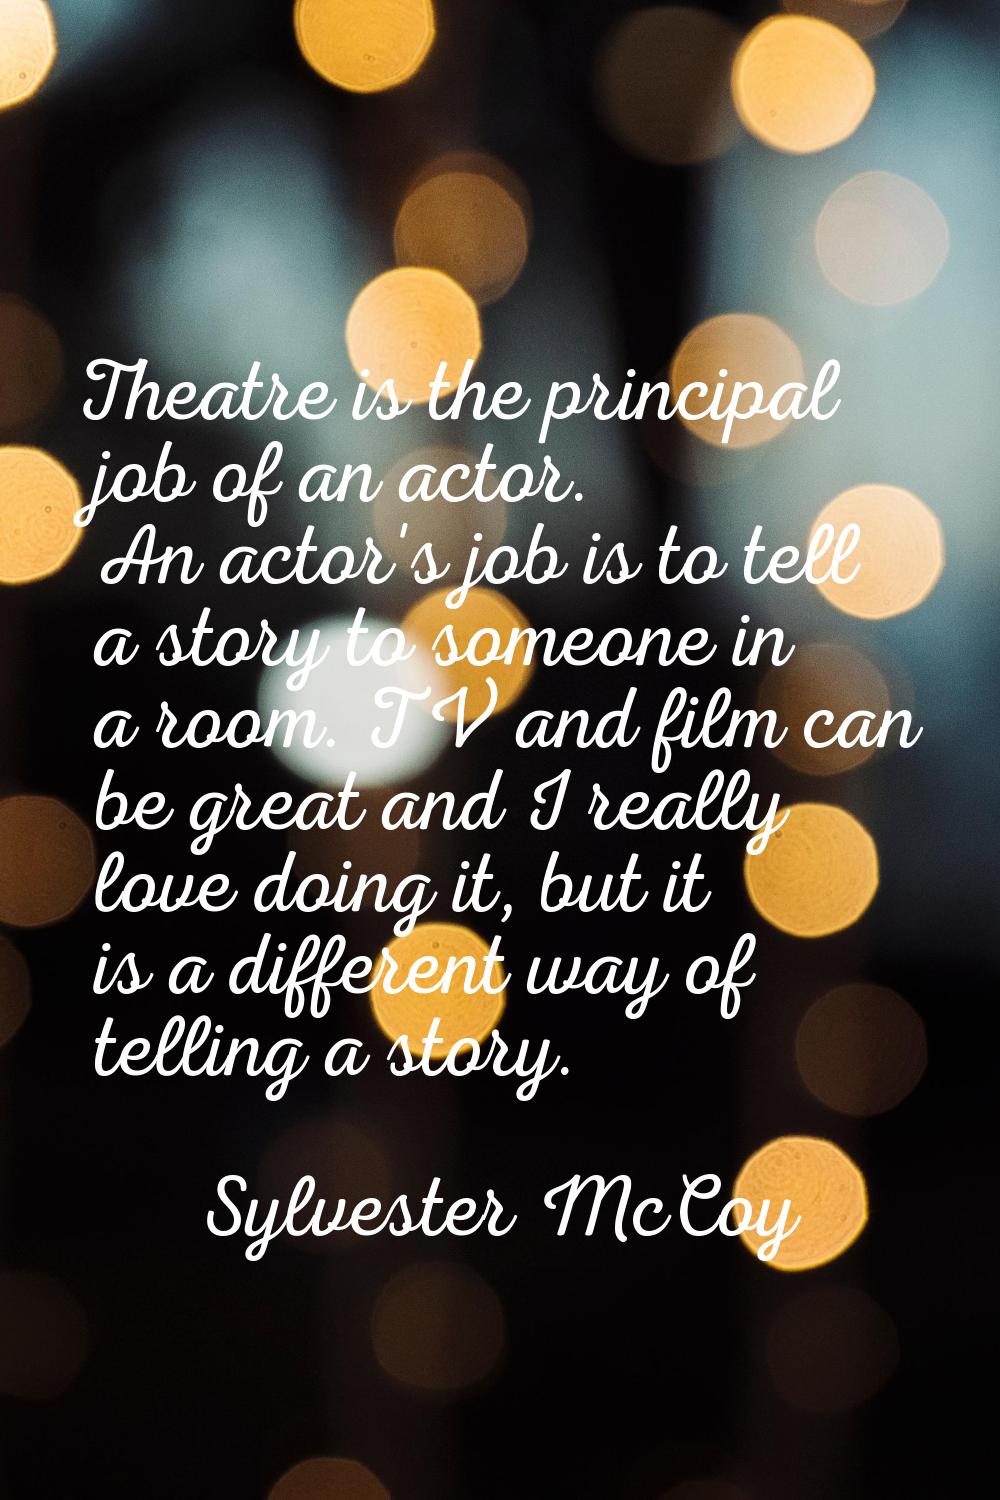 Theatre is the principal job of an actor. An actor's job is to tell a story to someone in a room. T